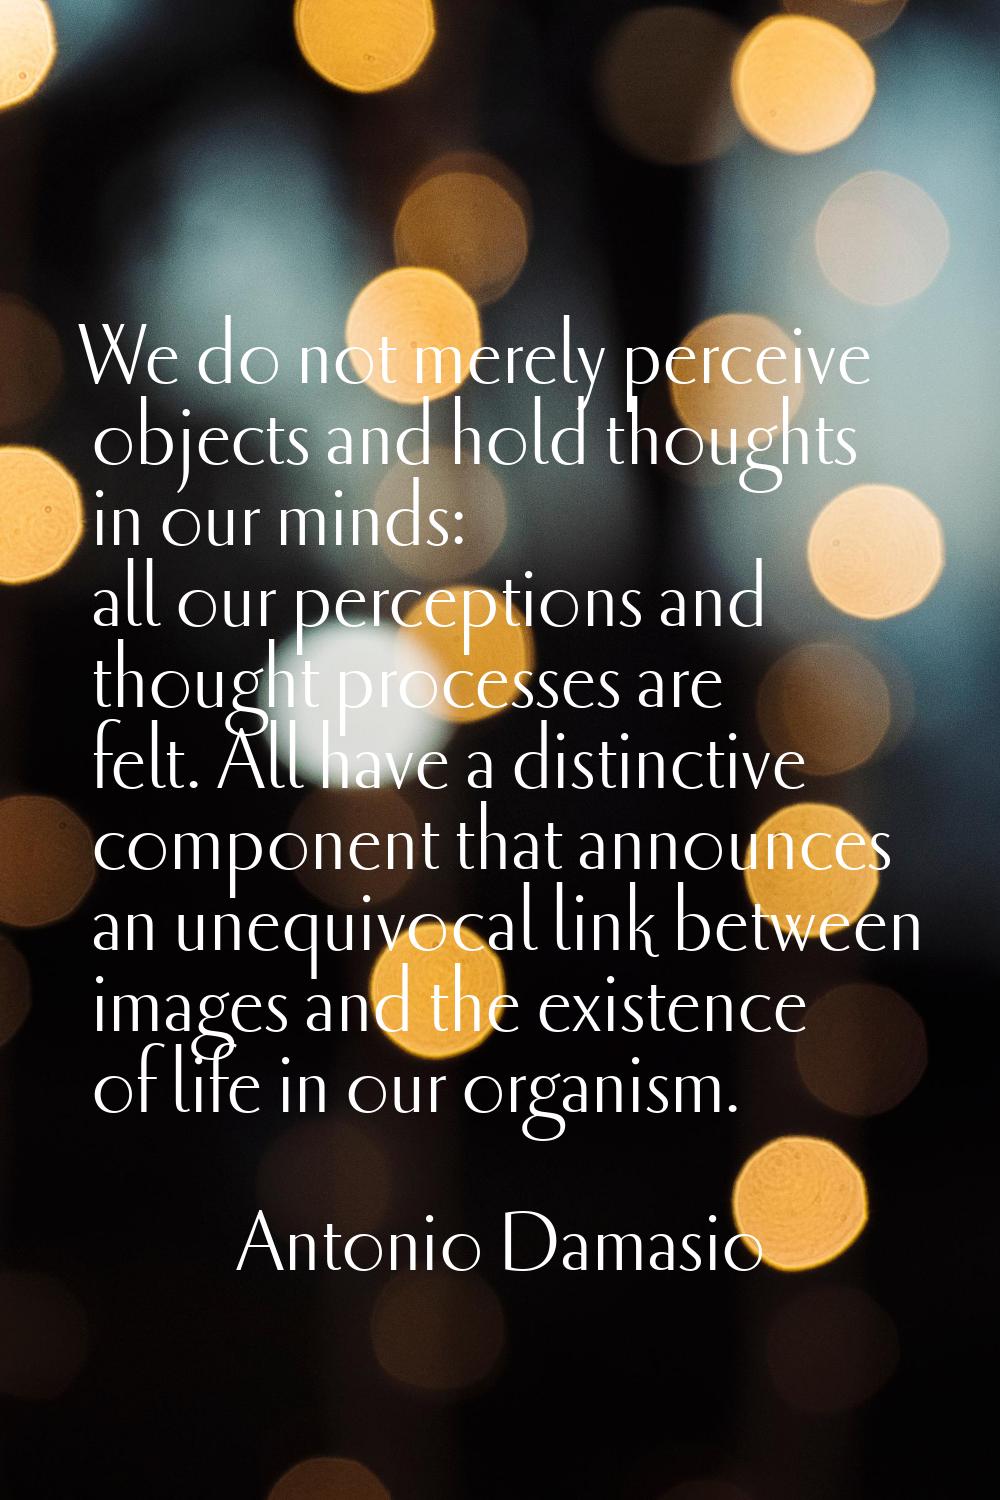 We do not merely perceive objects and hold thoughts in our minds: all our perceptions and thought p